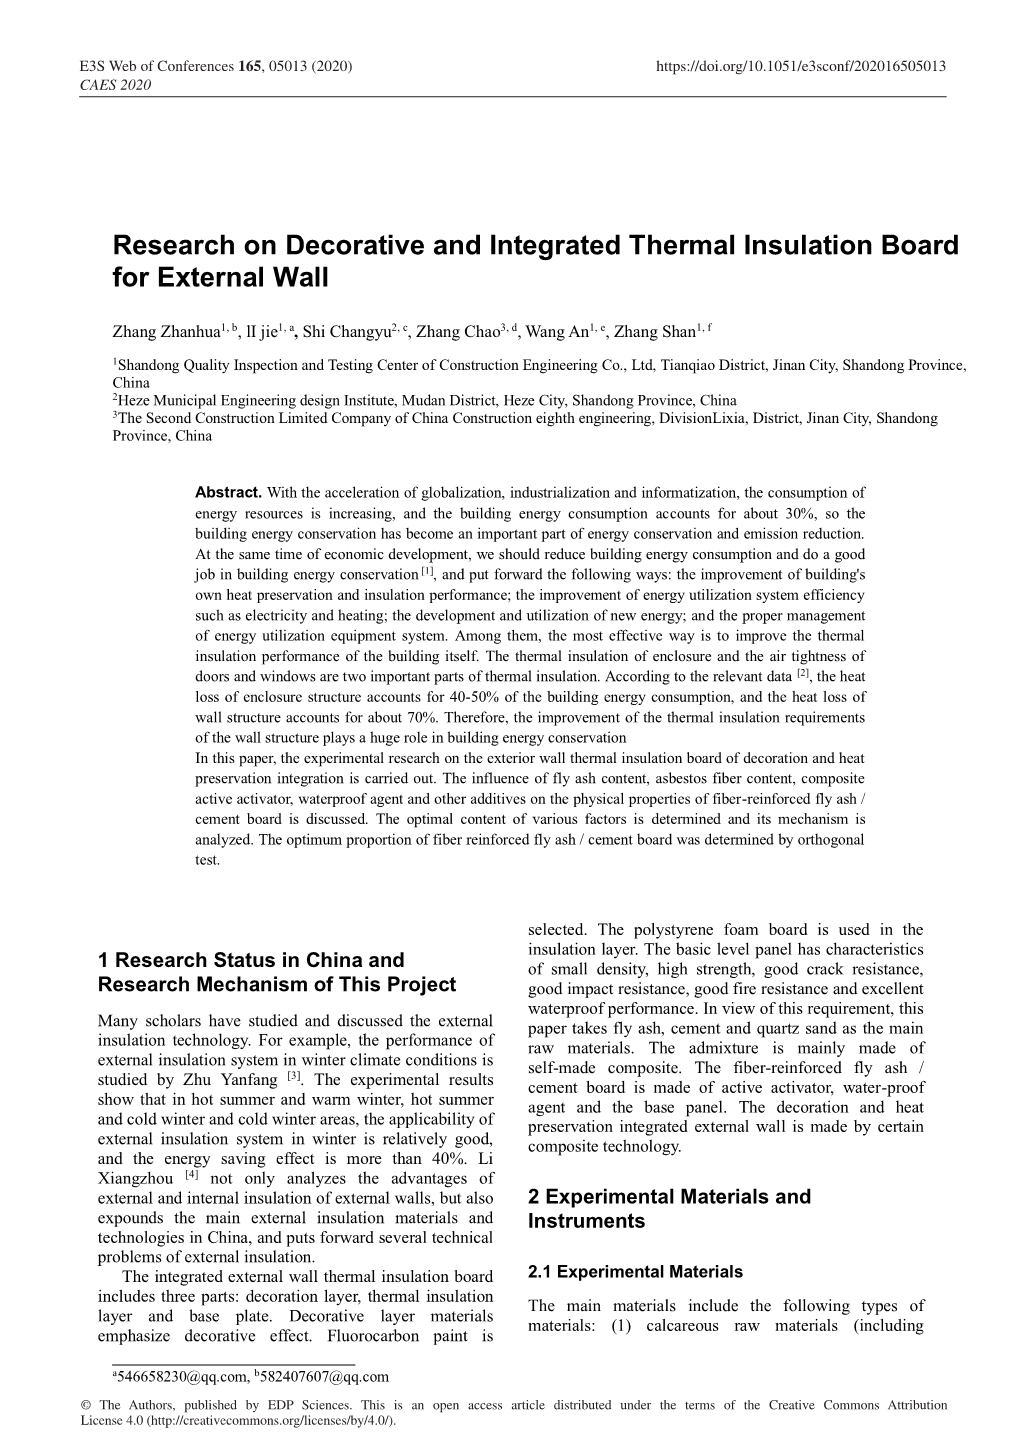 Research on Decorative and Integrated Thermal Insulation Board for External Wall